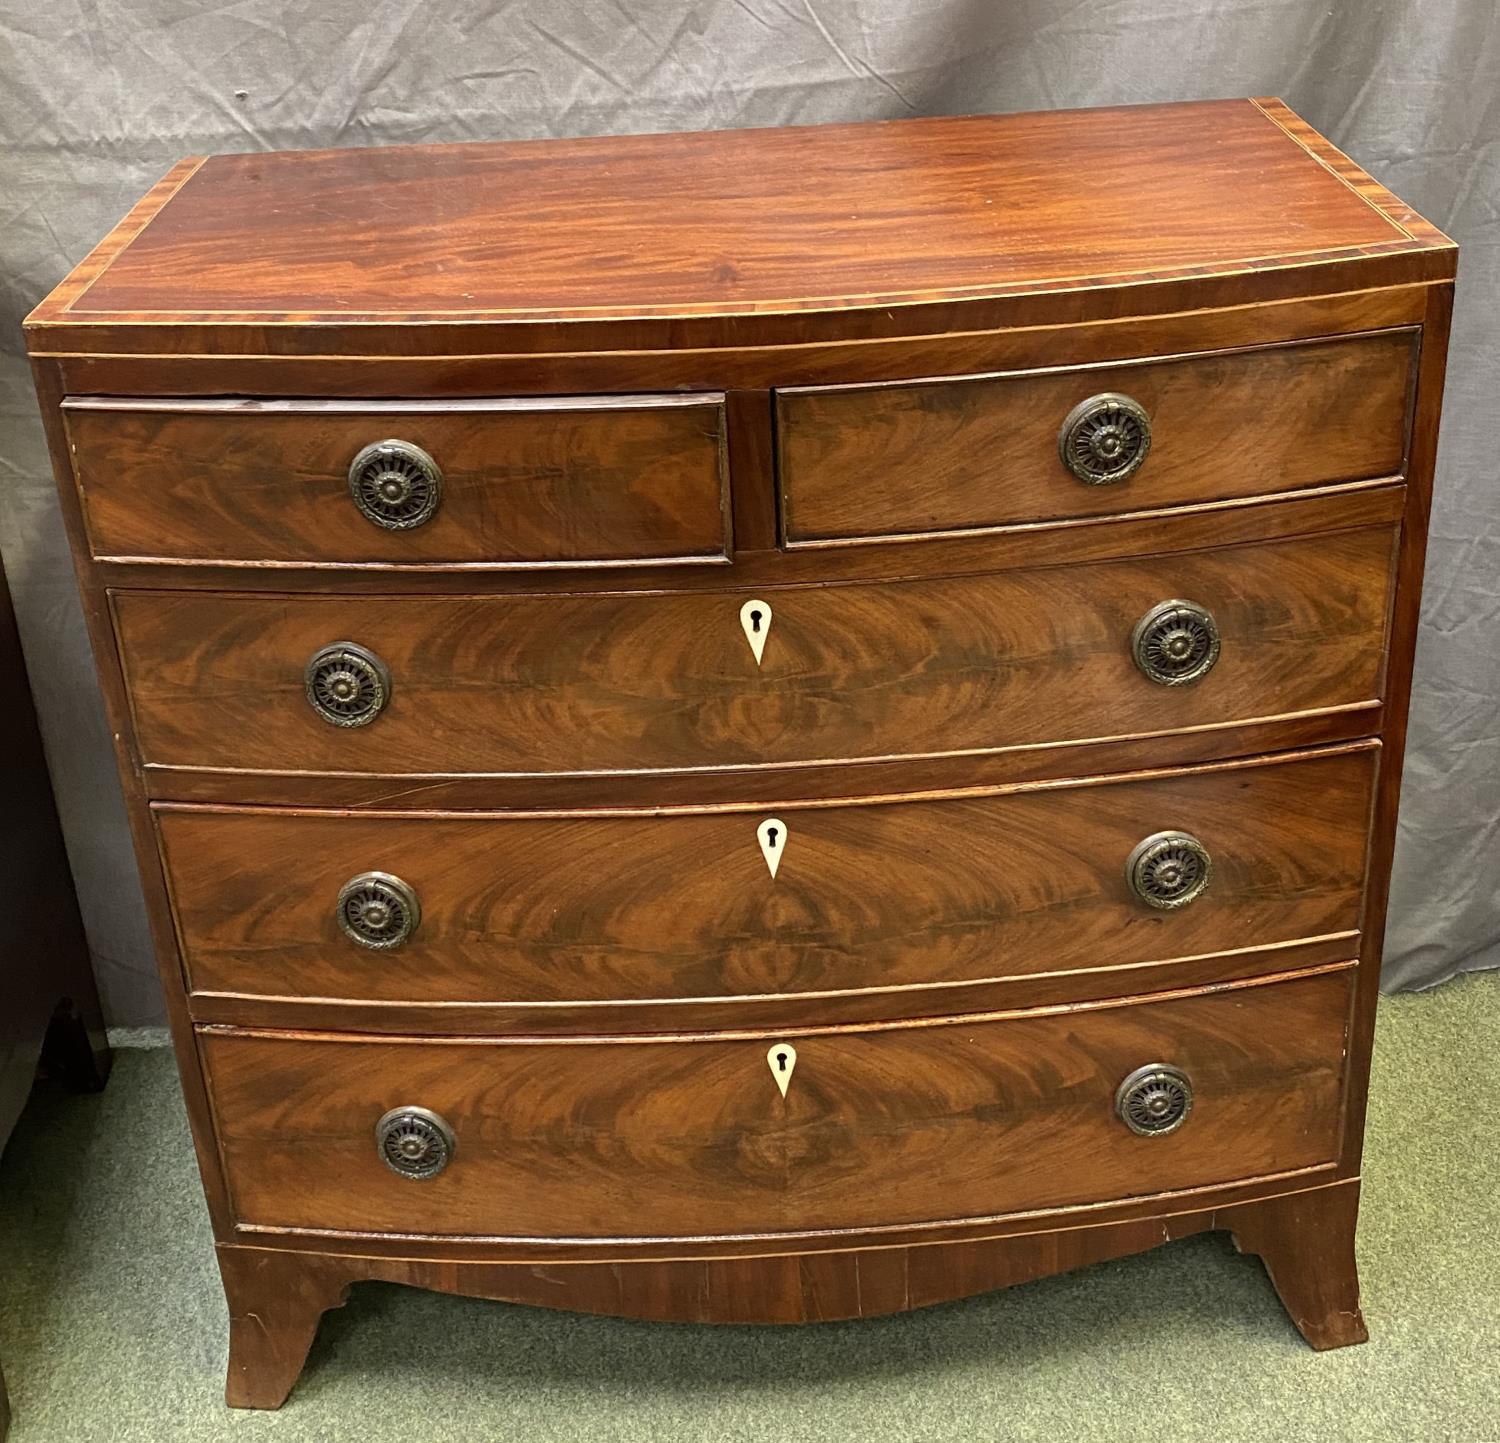 Small Regency mahogany bow front chest of 2S and 3L graduated drawers 80W x 80H